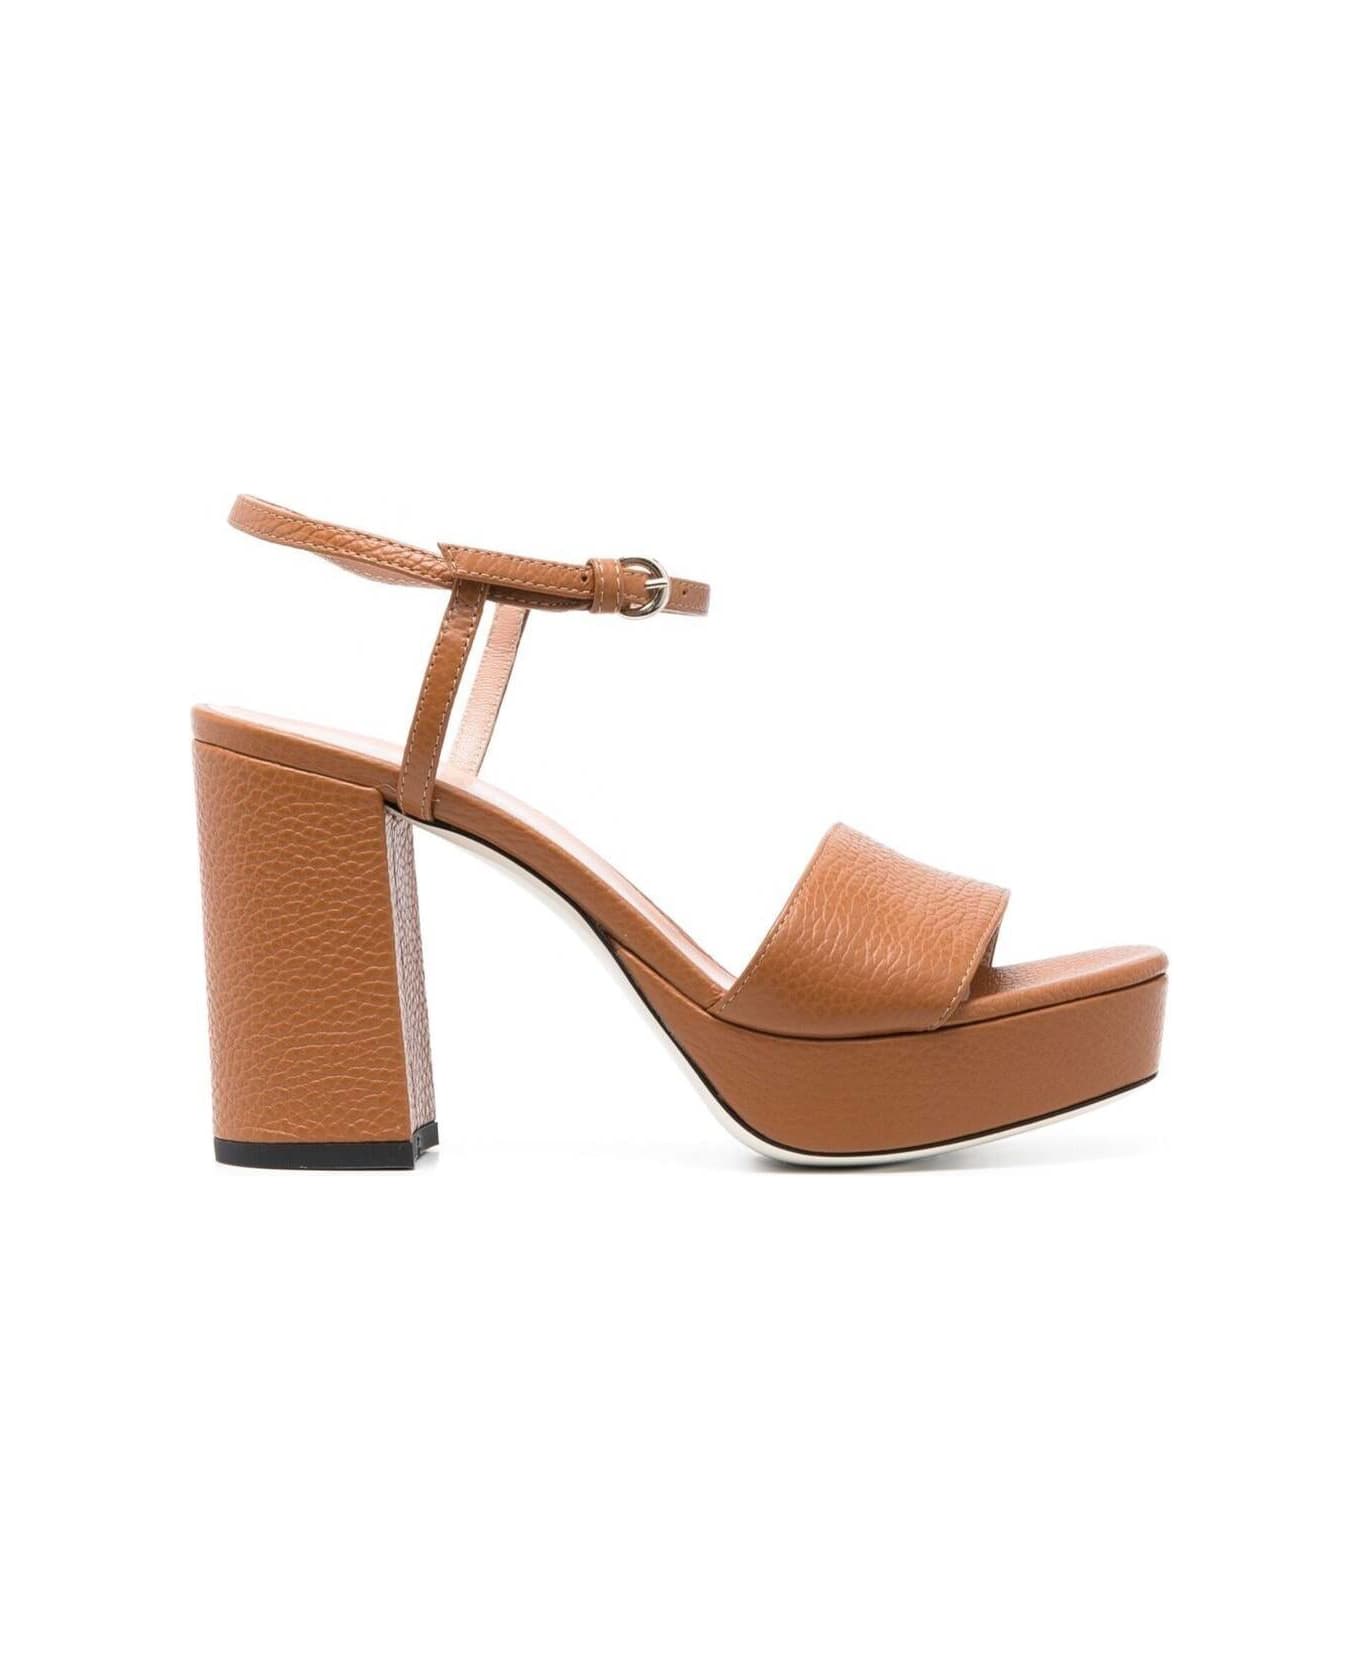 Pollini Plateau Sandals With Block Heel In Brown Leather Woman - Brown